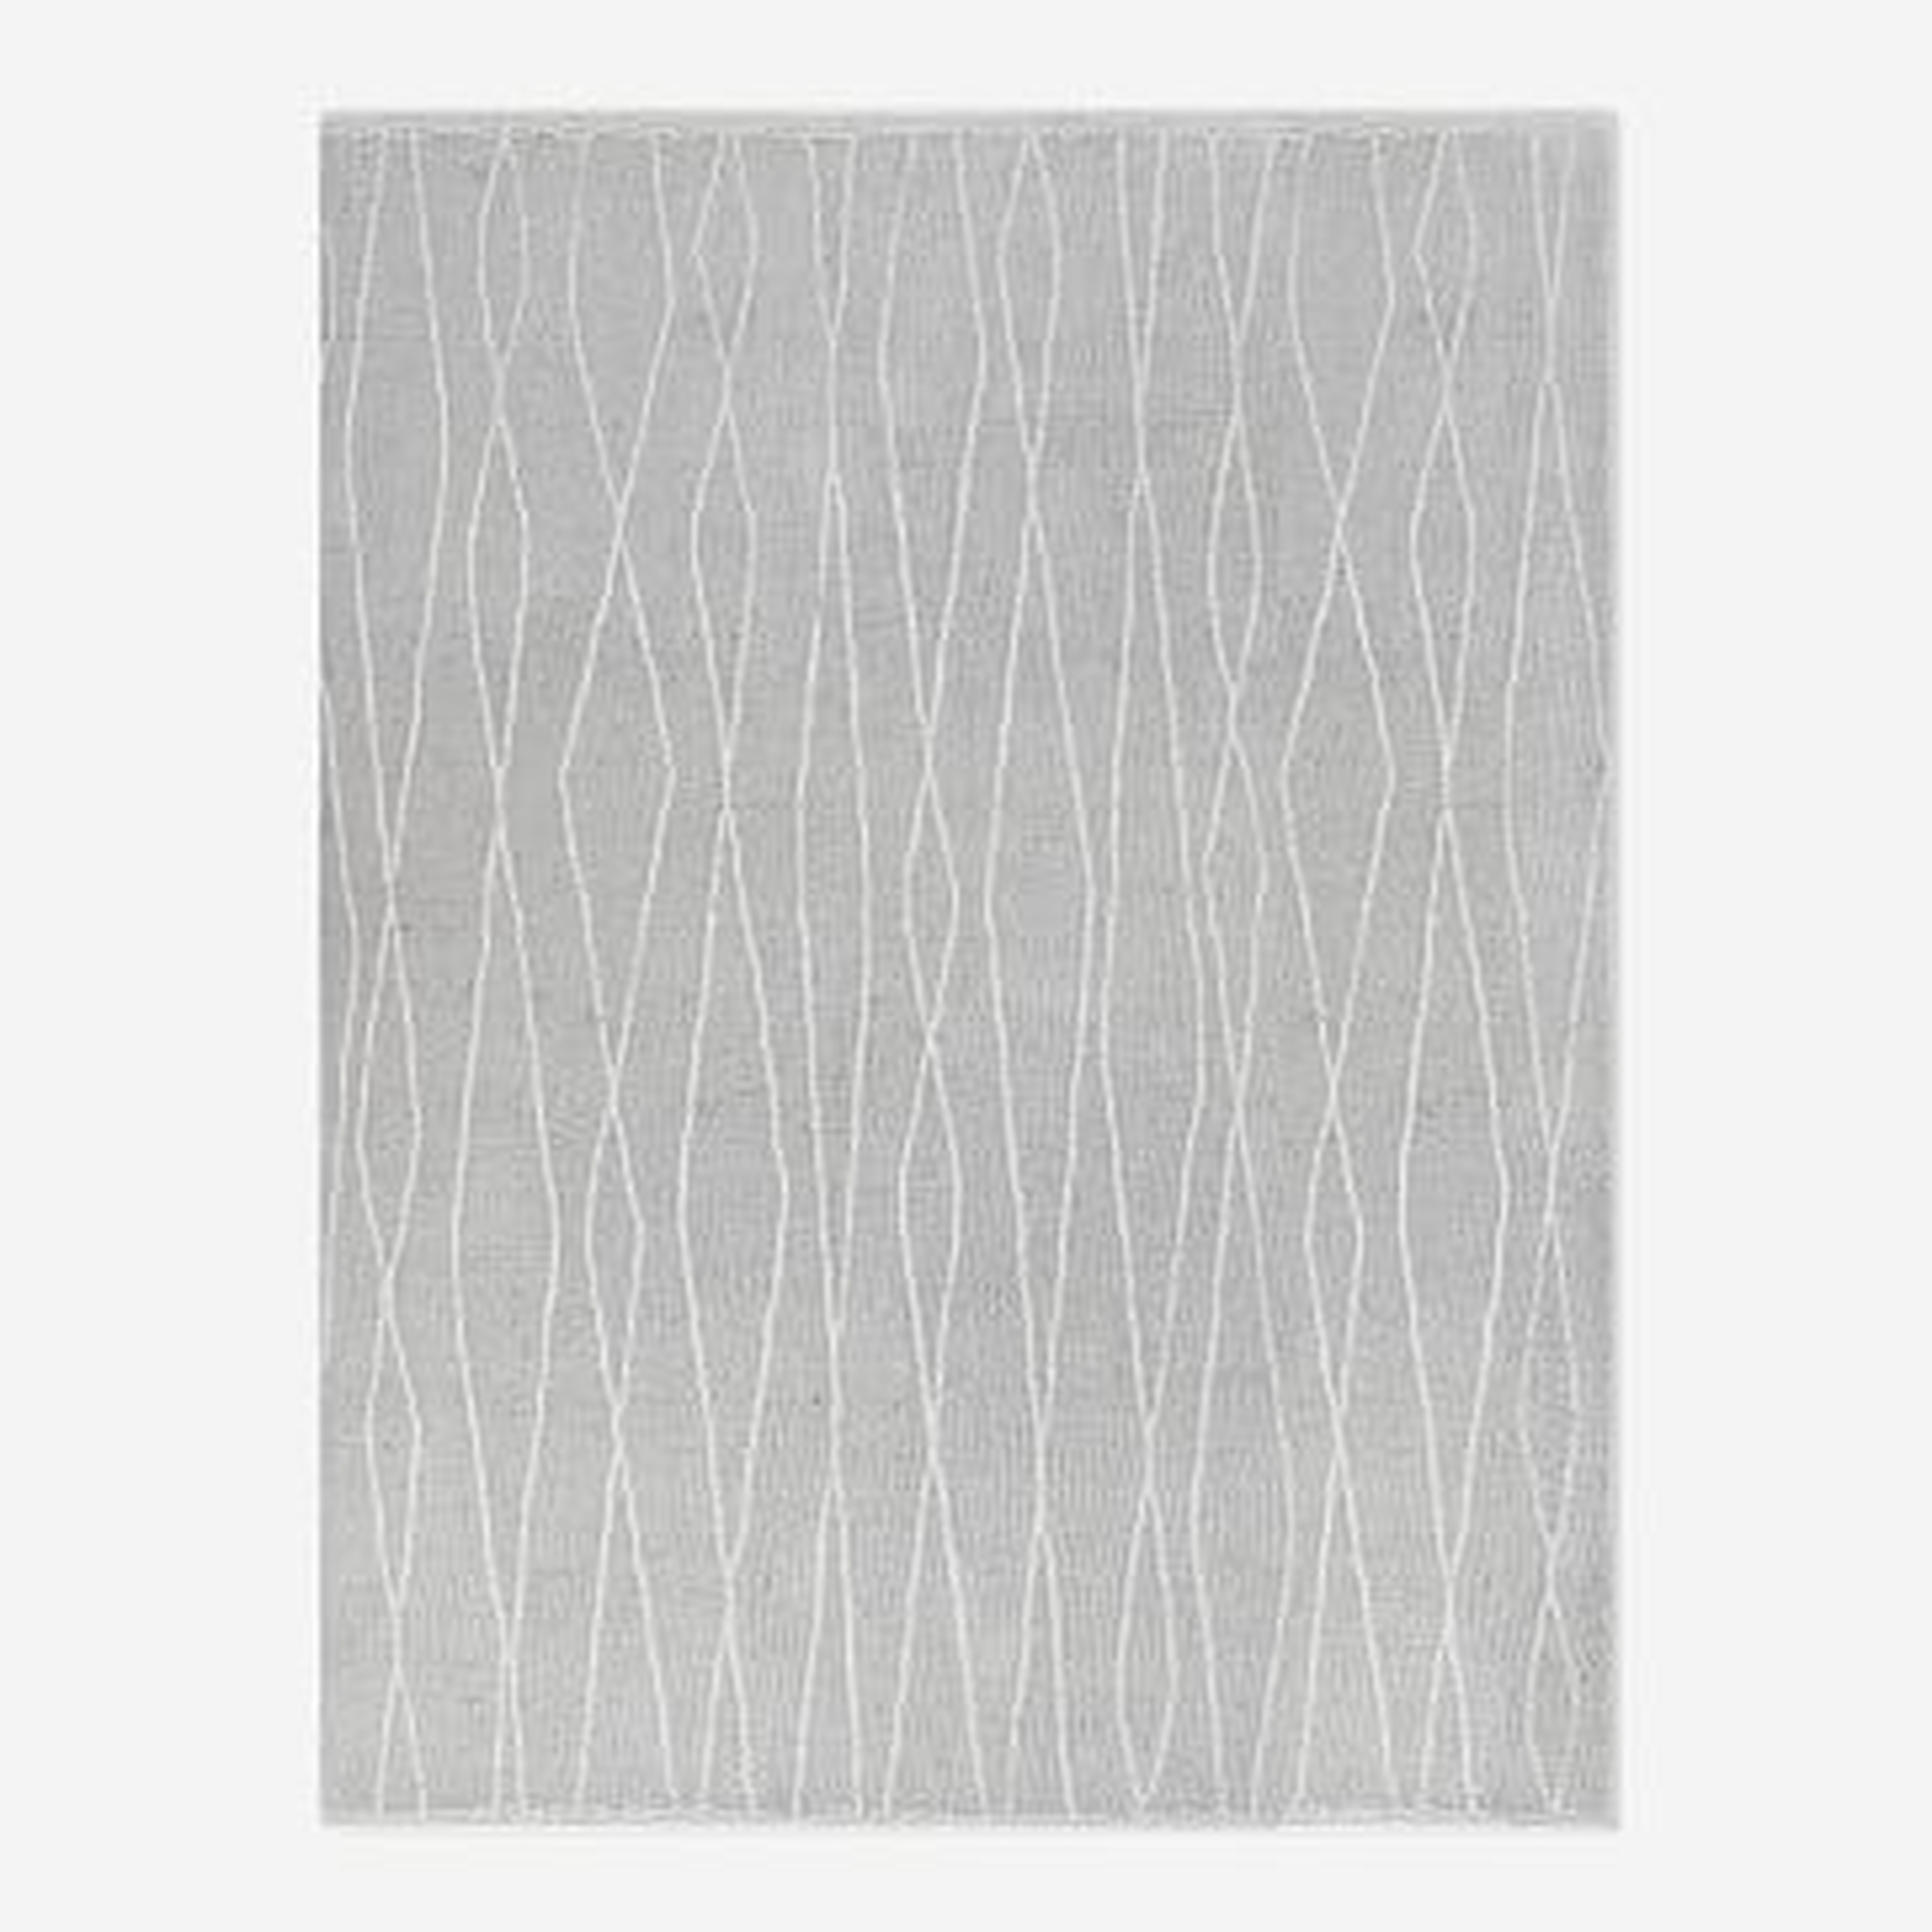 Safi Rug, Frost Gray, 8'x10' - West Elm